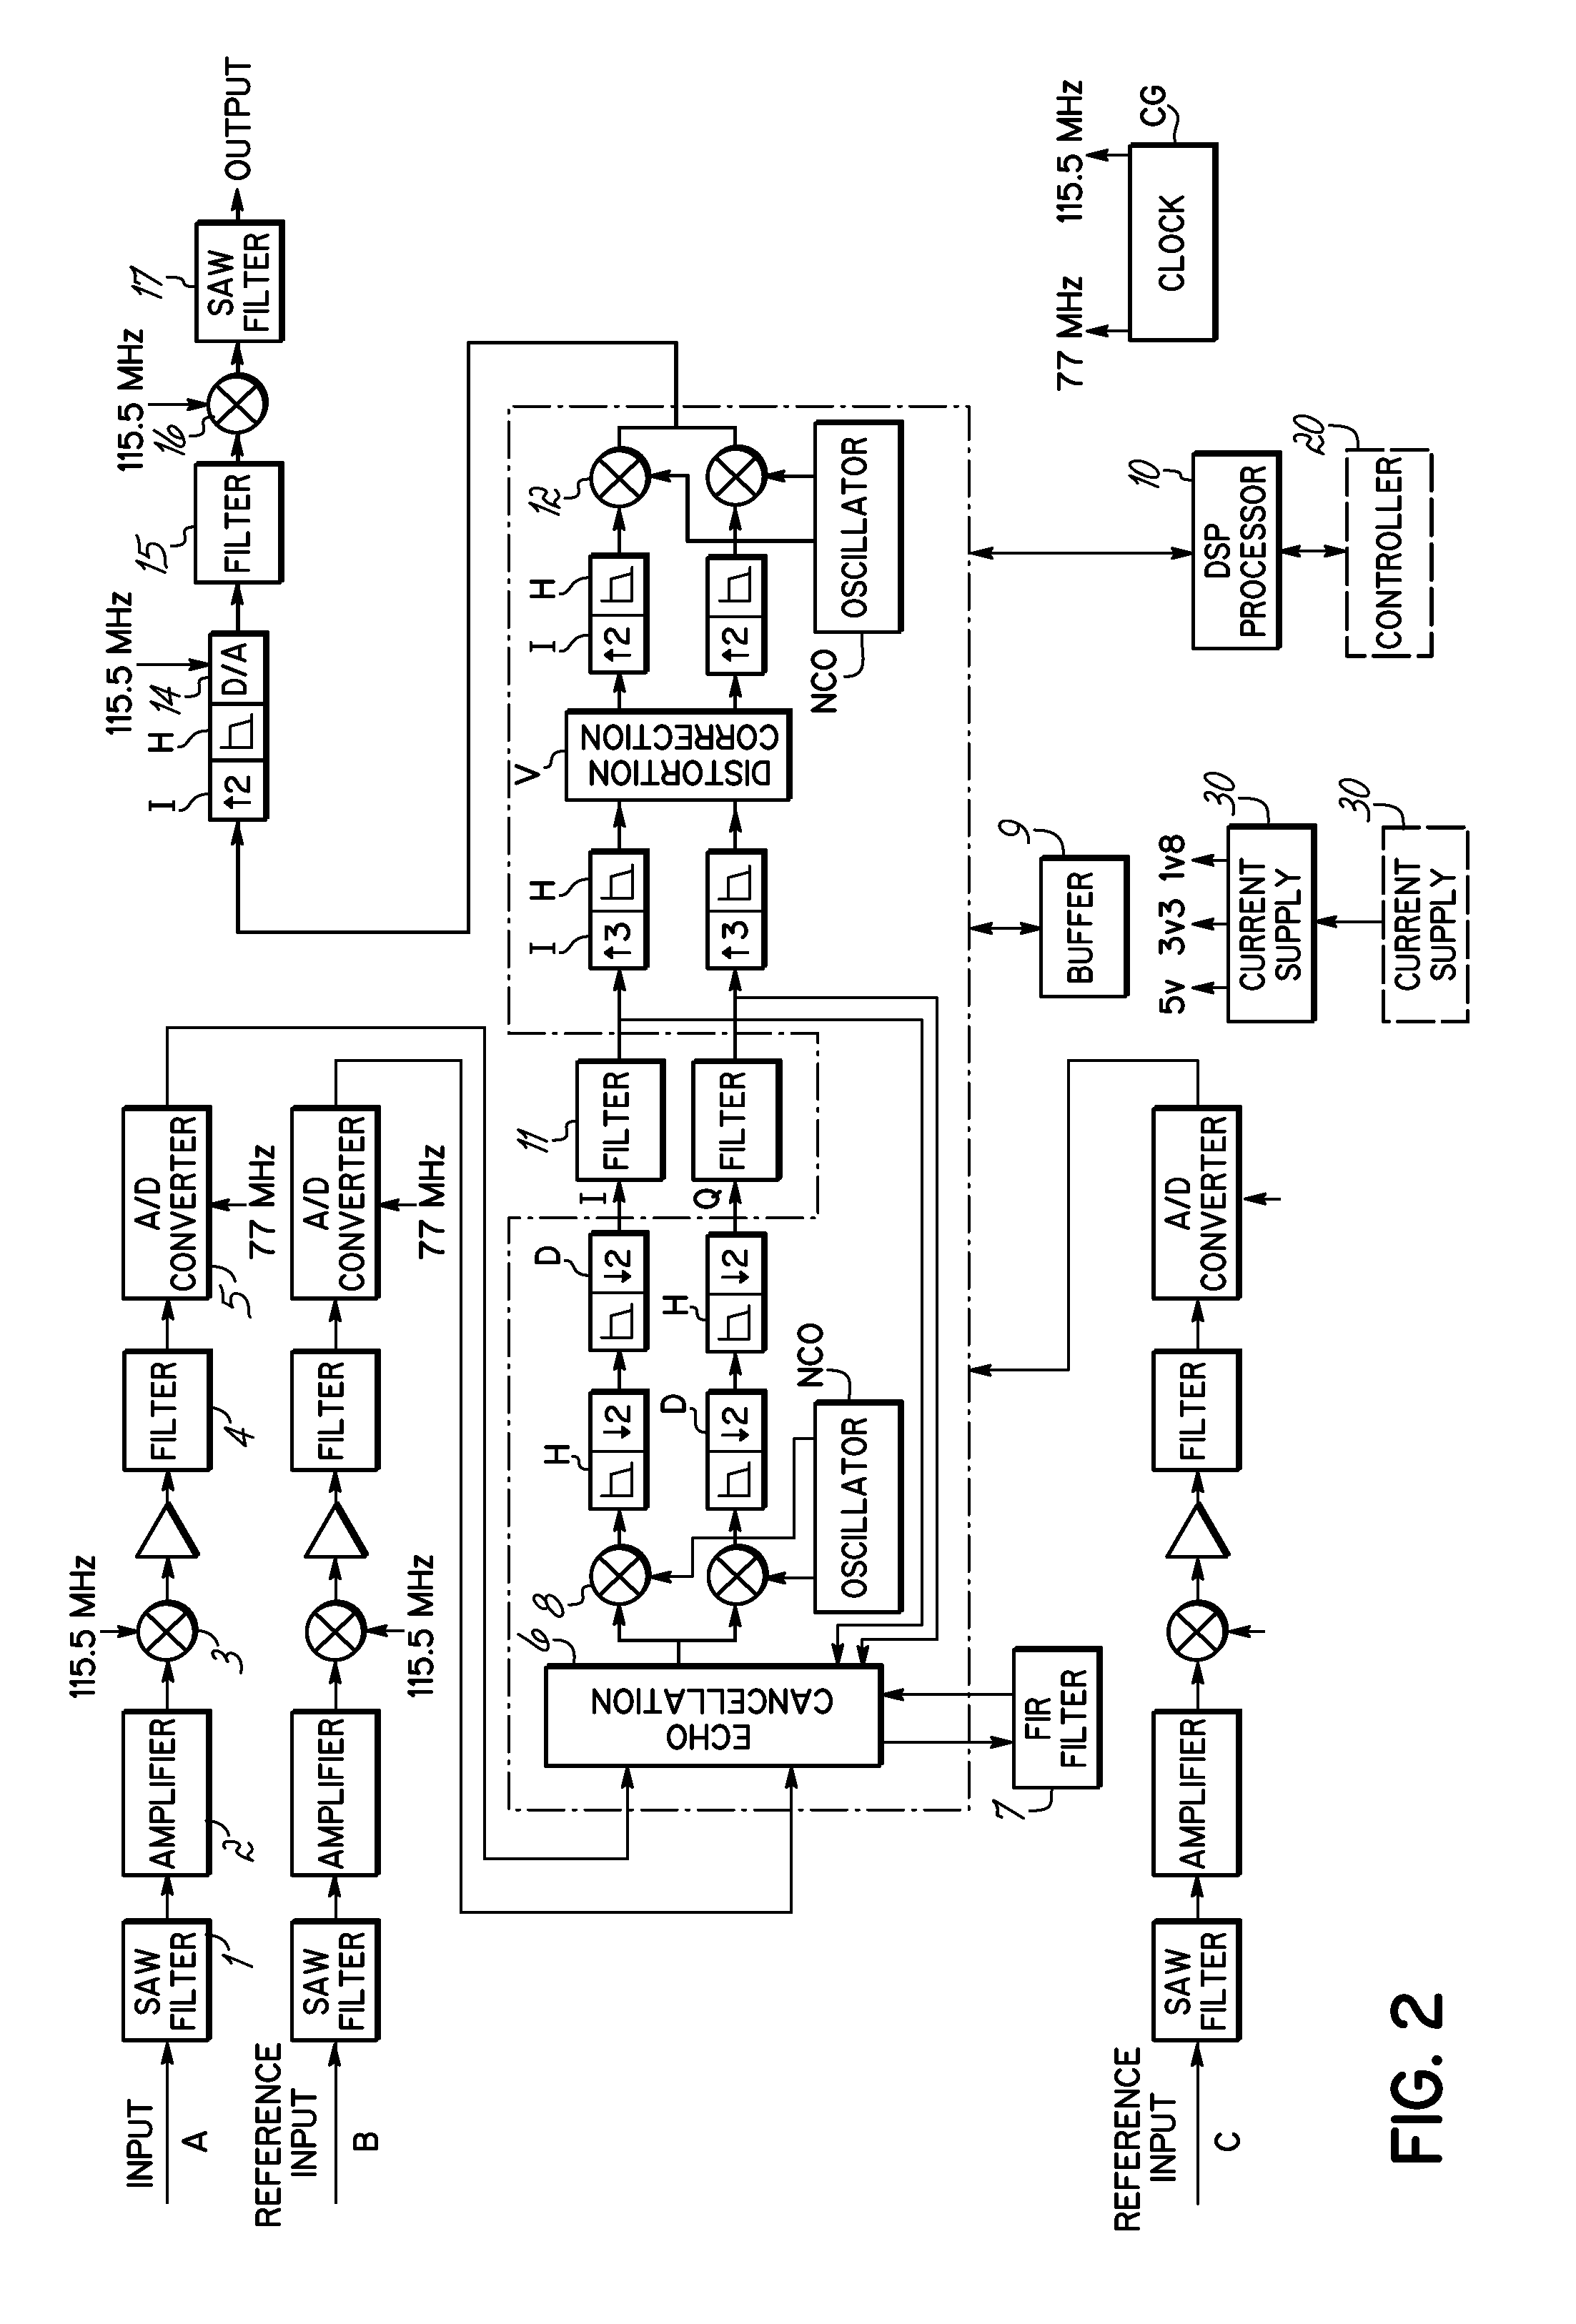 Digital repeater having bandpass filtering, adaptive pre-equalization and suppression of natural oscillation